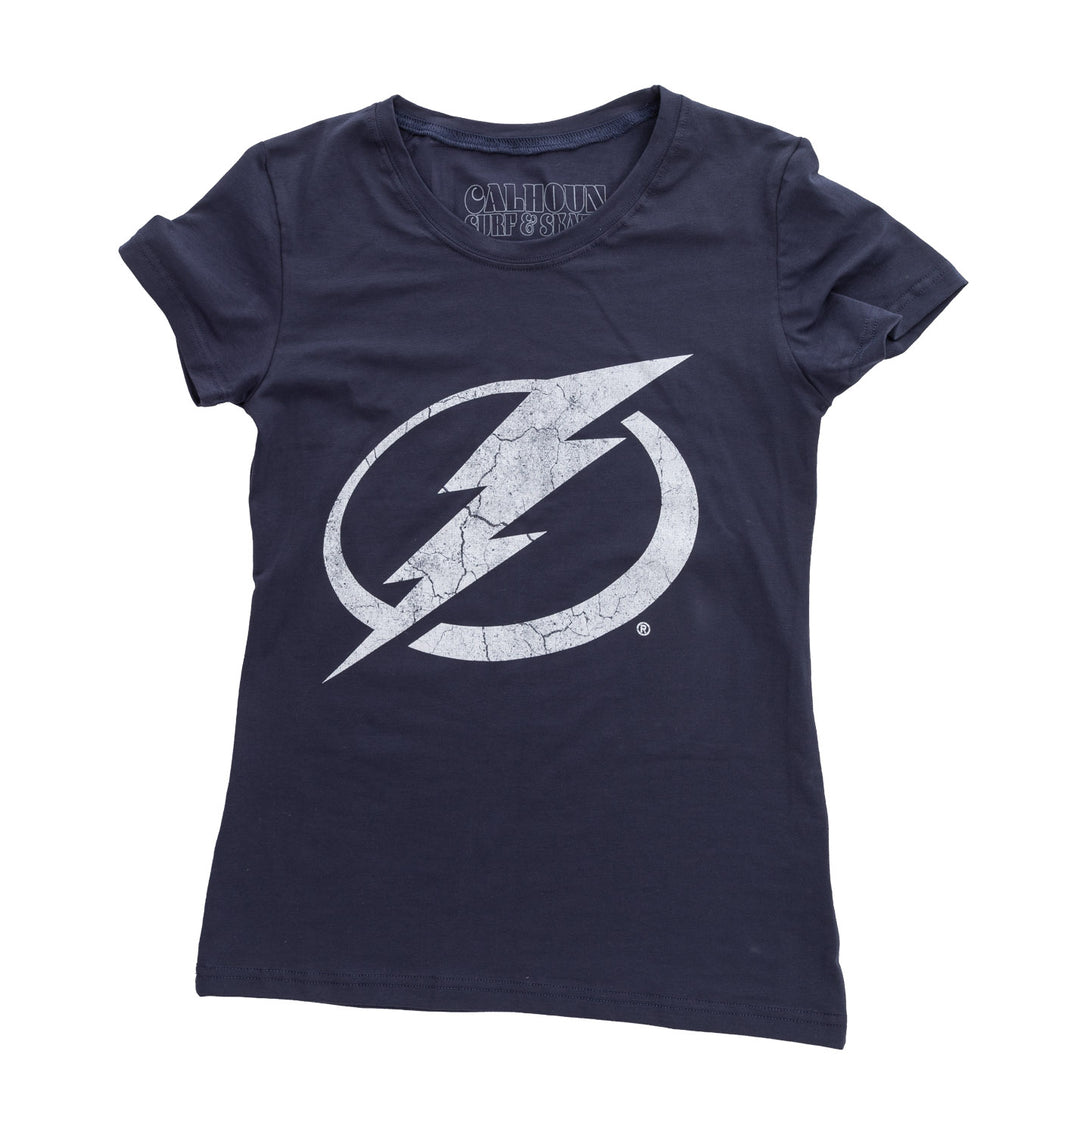 Tampa Bay Lightning Women's Distressed Print Fitted Crew Neck Premium T-Shirt - Navy